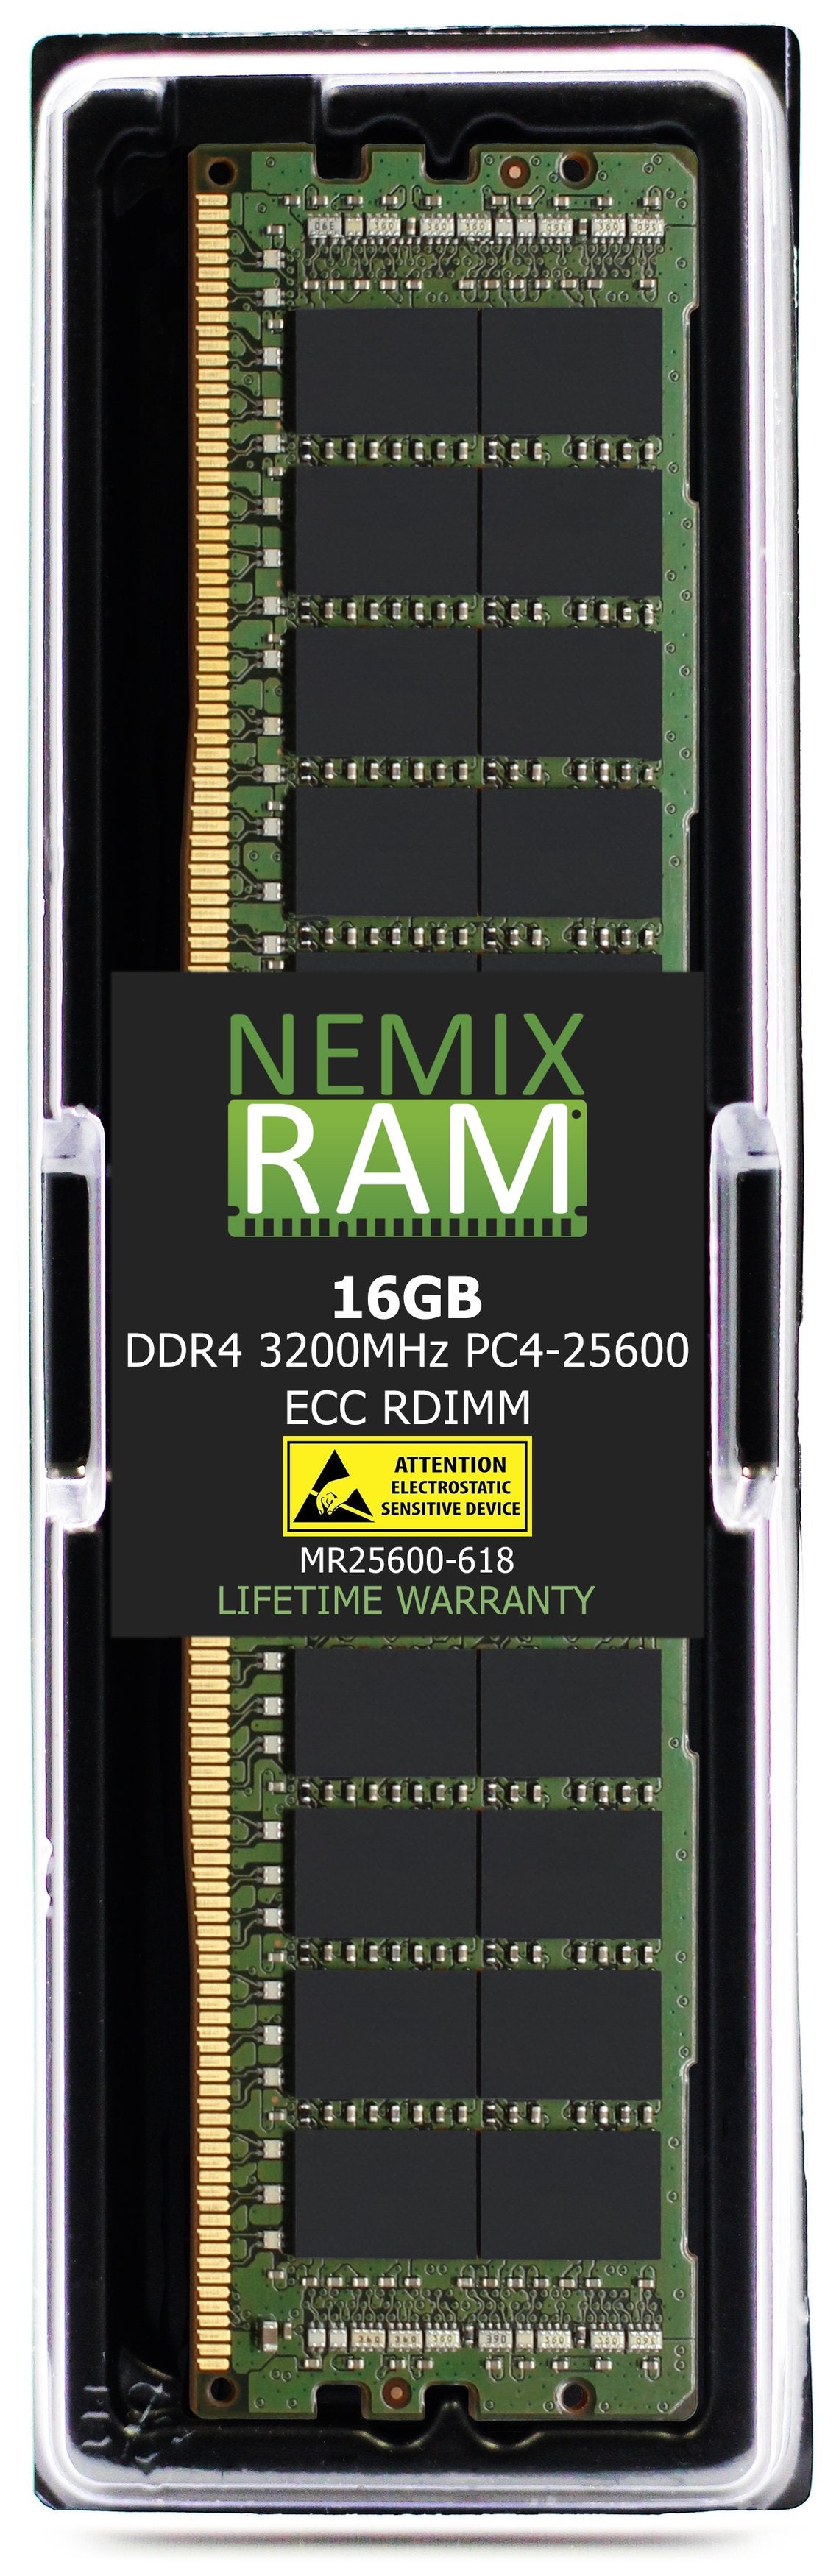 16GB DDR4 3200MHZ PC4-25600 RDIMM Compatible with Supermicro MEM-DR416MB-ER32